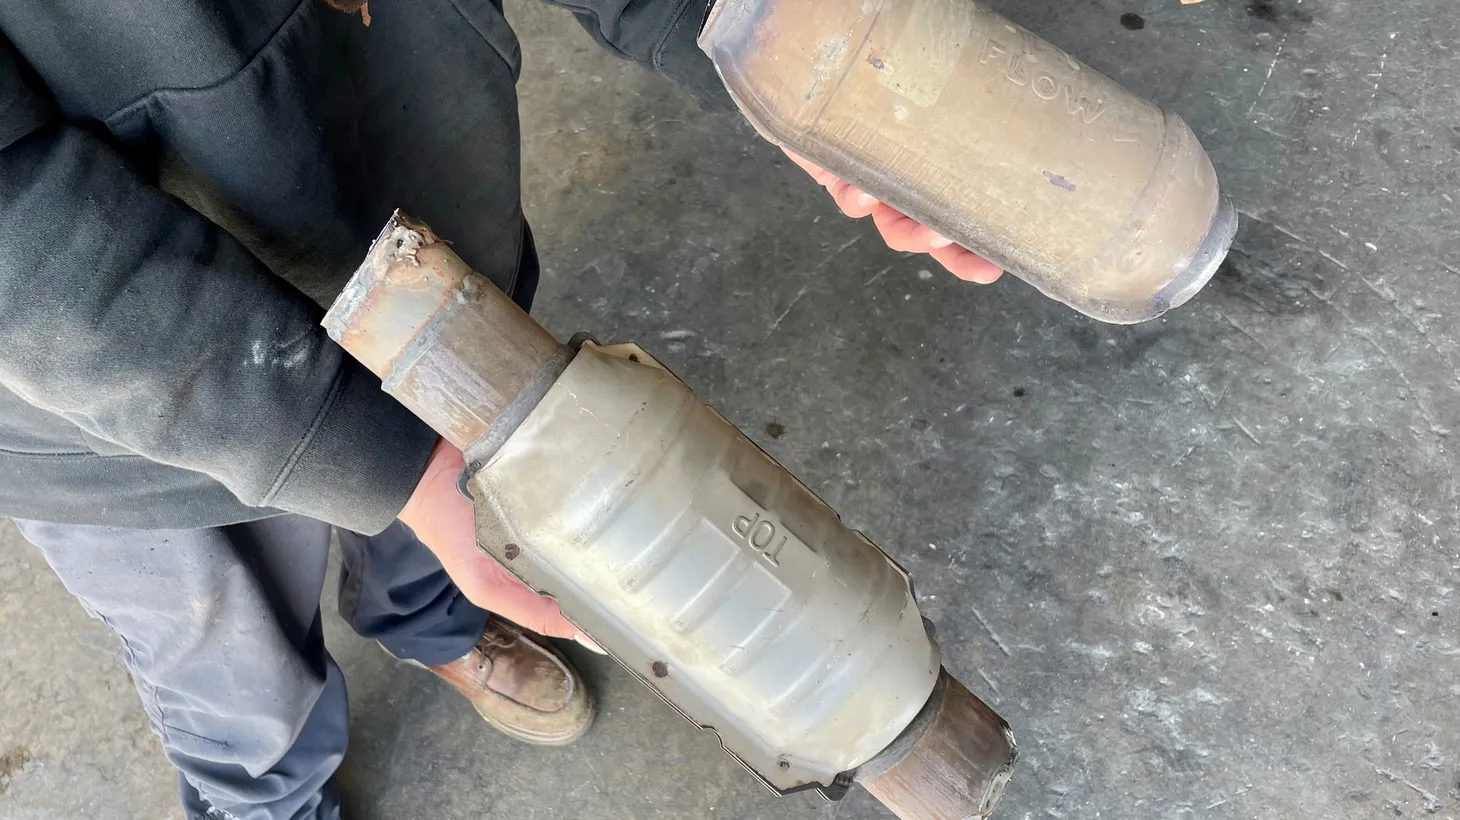 Van Nuys mechanic Edward Luna holds two used catalytic converters, which thieves are stealing from cars in record numbers across Los Angeles.